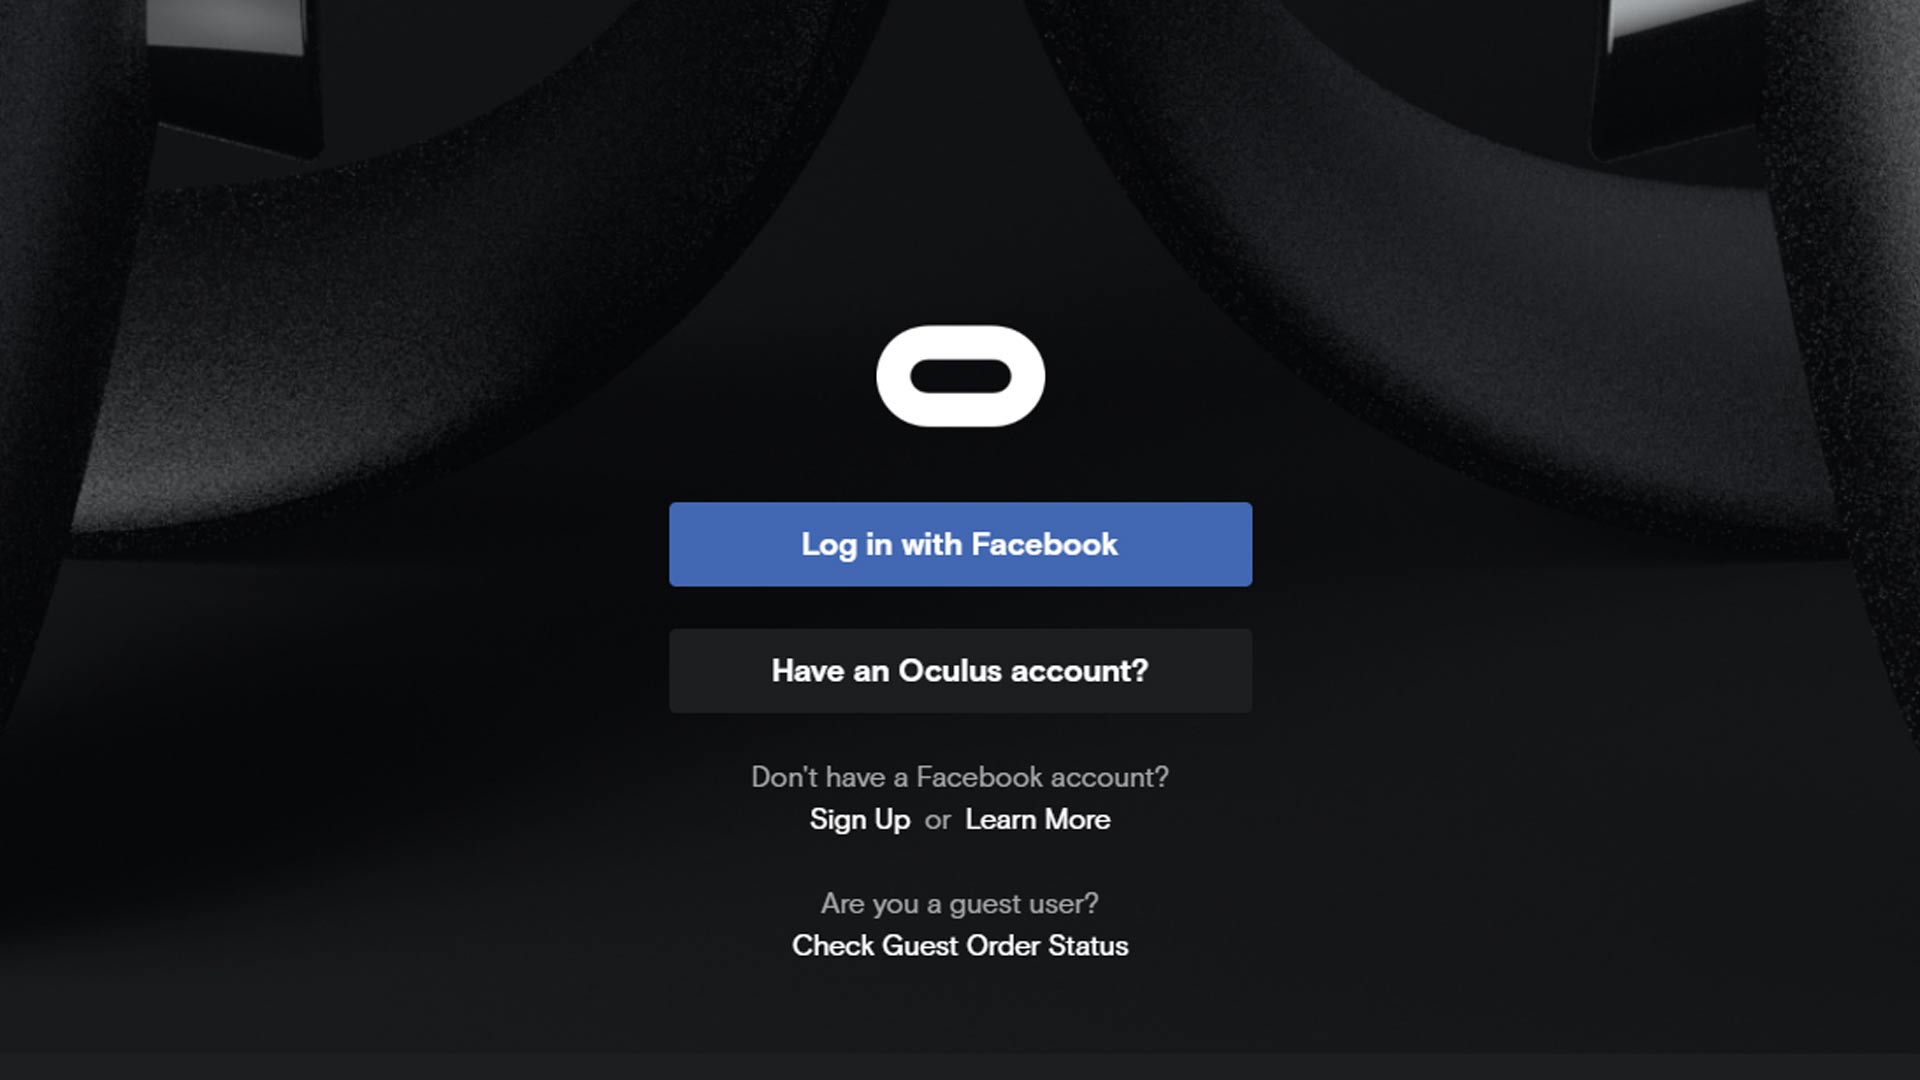 Facebook Login - Sign in, Sign up & Log in - How to log into